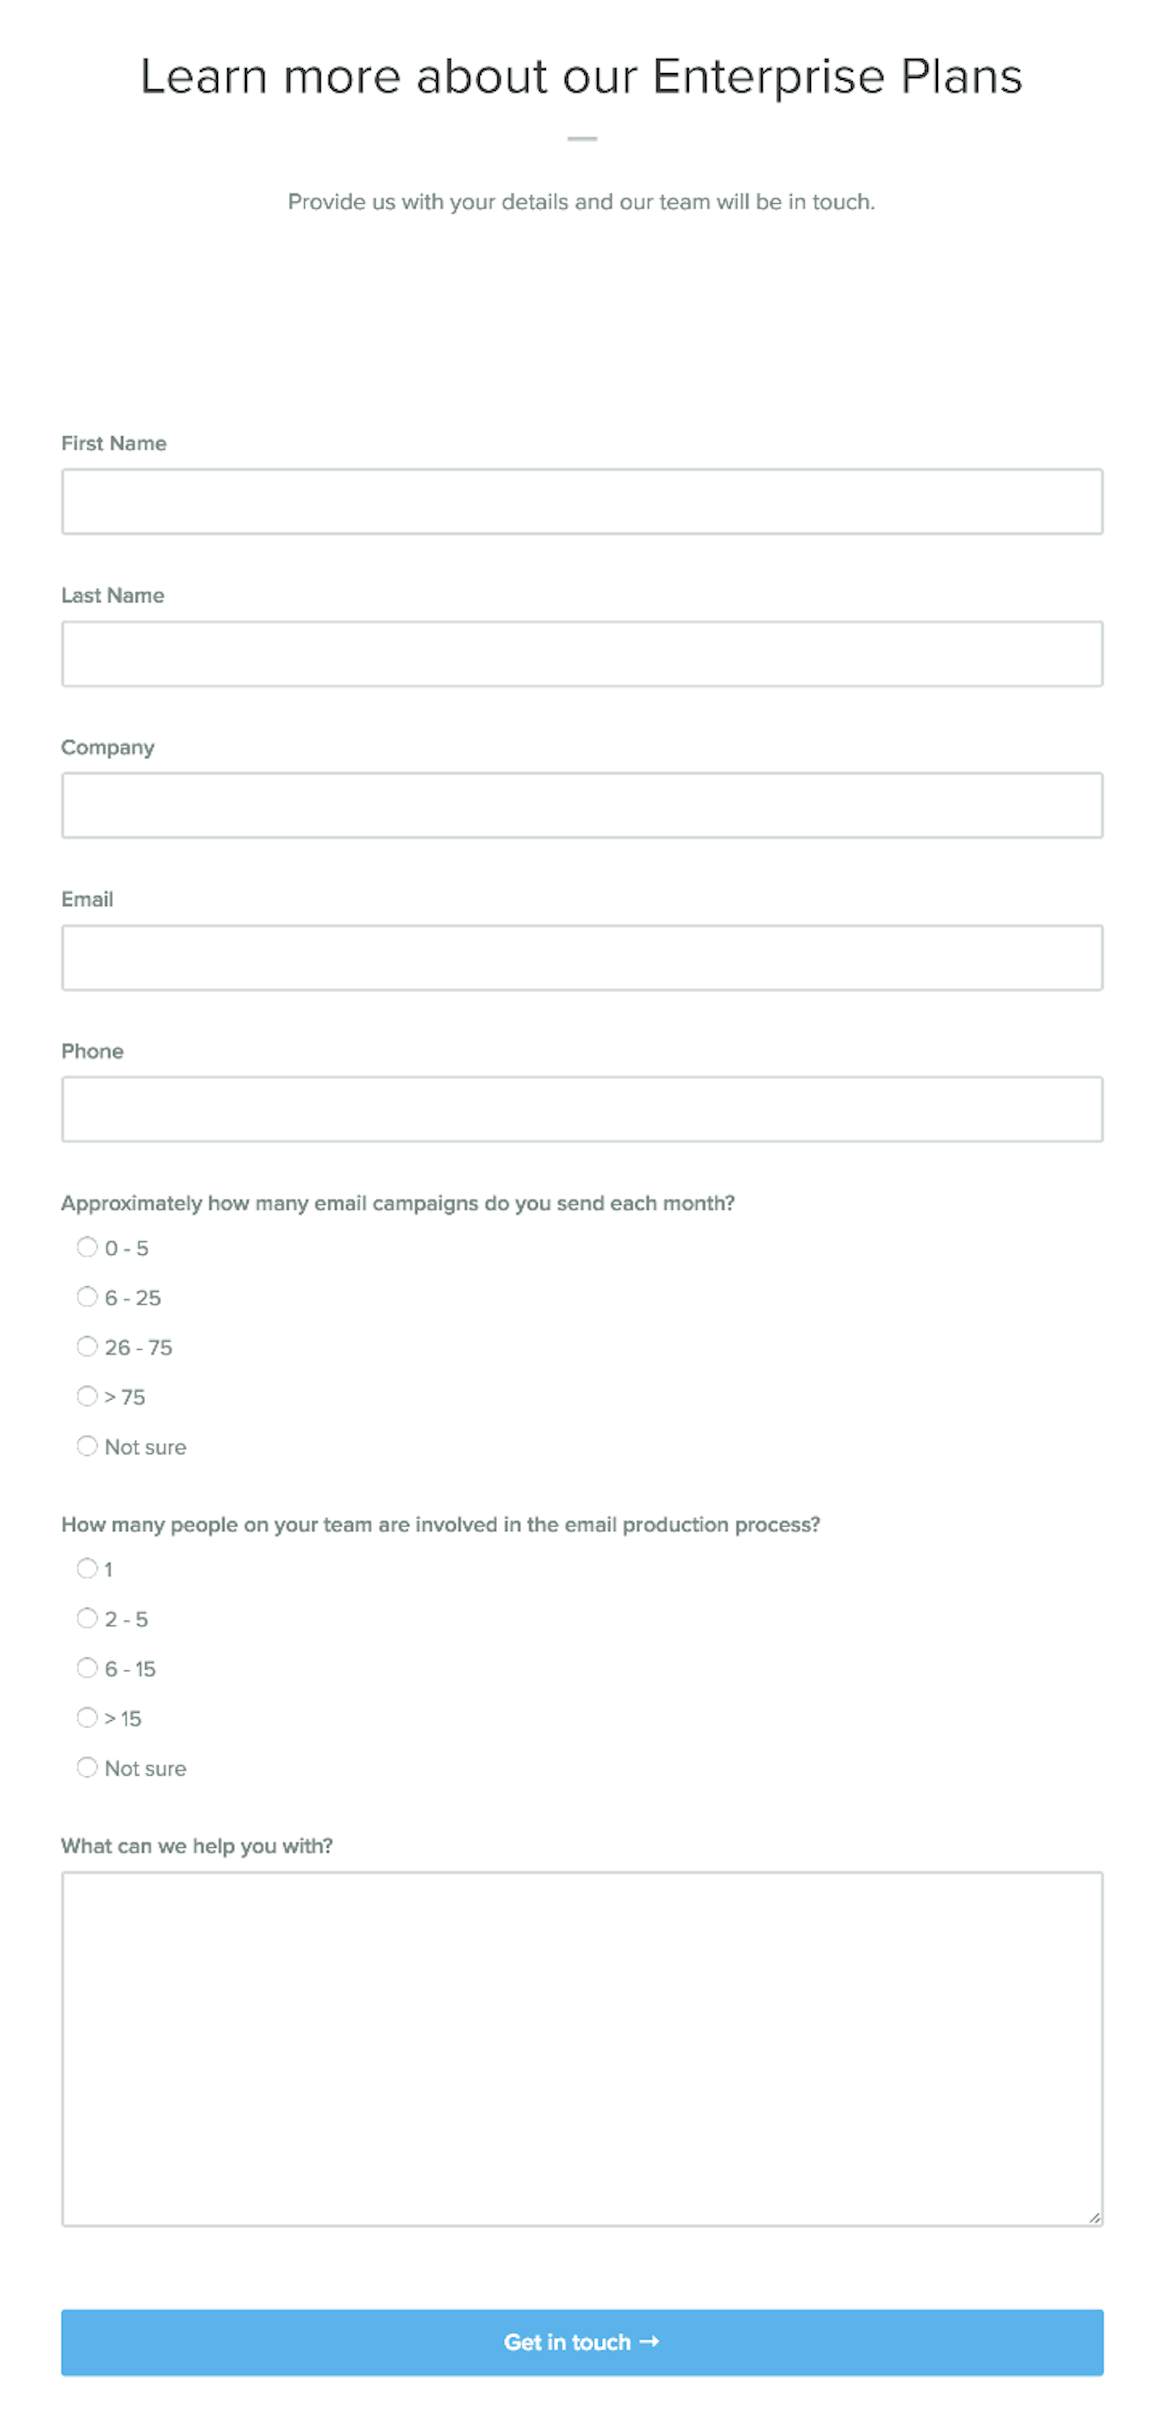 Litmus provides a high-converting form on their enterprise page